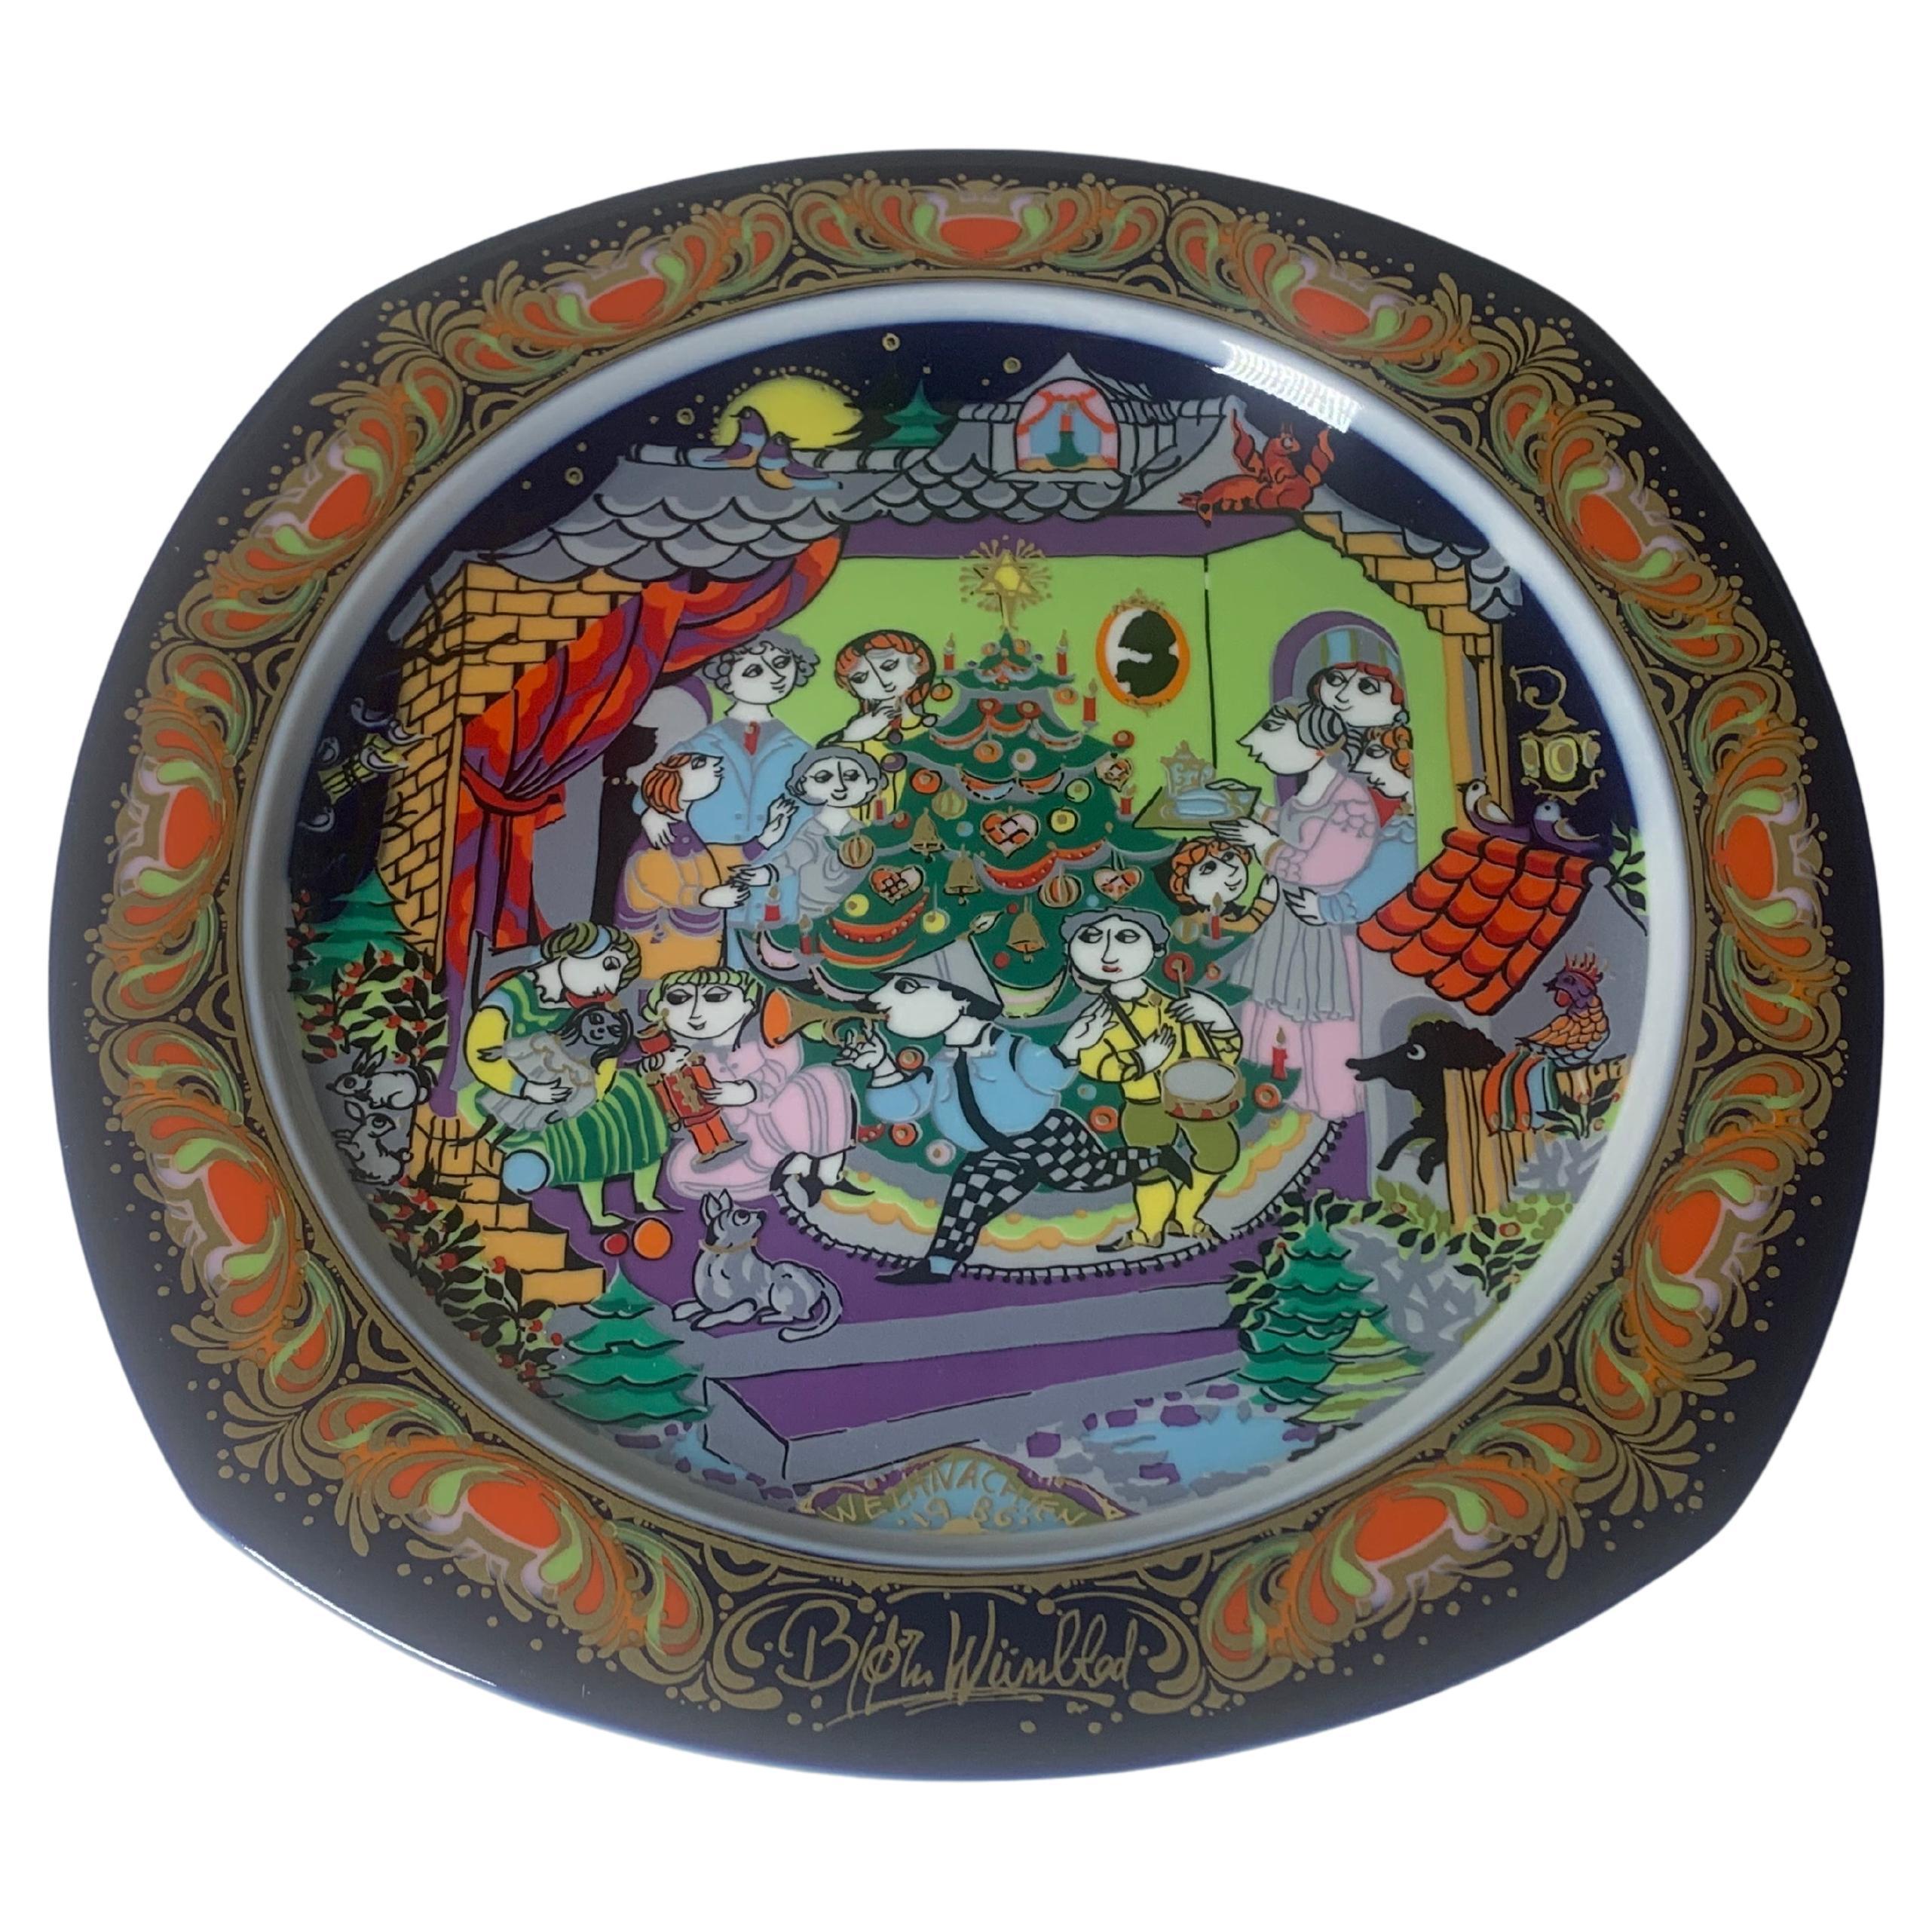 Christmas Songs Plate by Bjorn Wiinblad for Rosenthal from 1986 For Sale